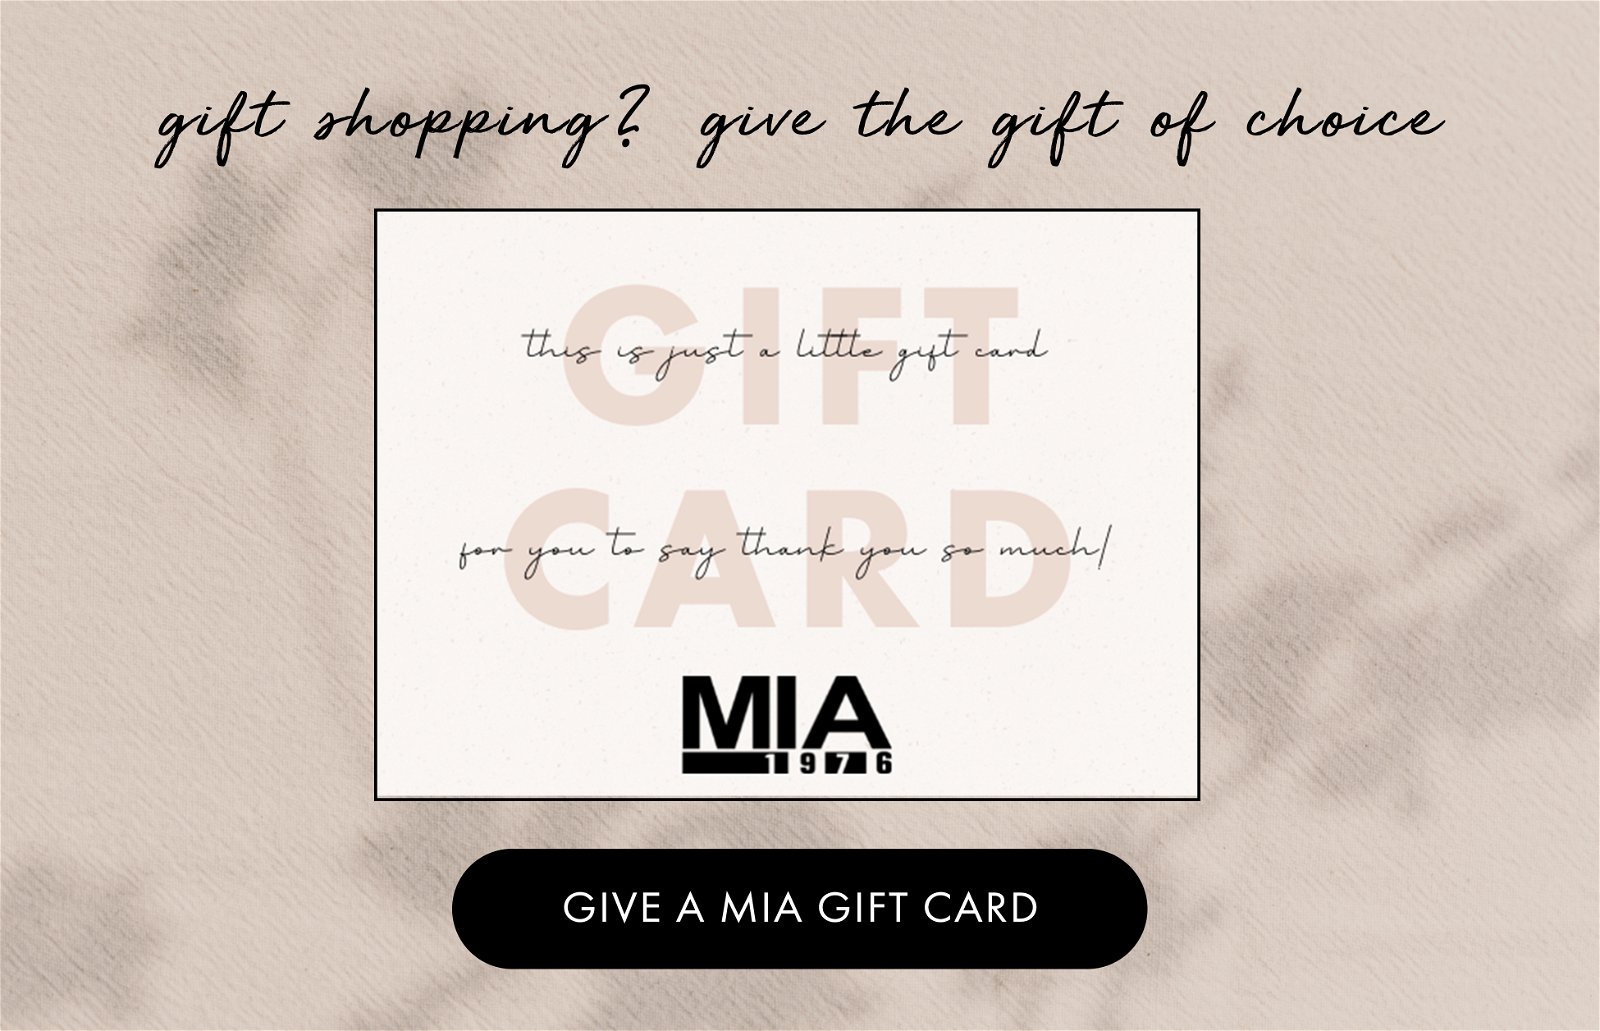 MIA SHOES GIFT CARD